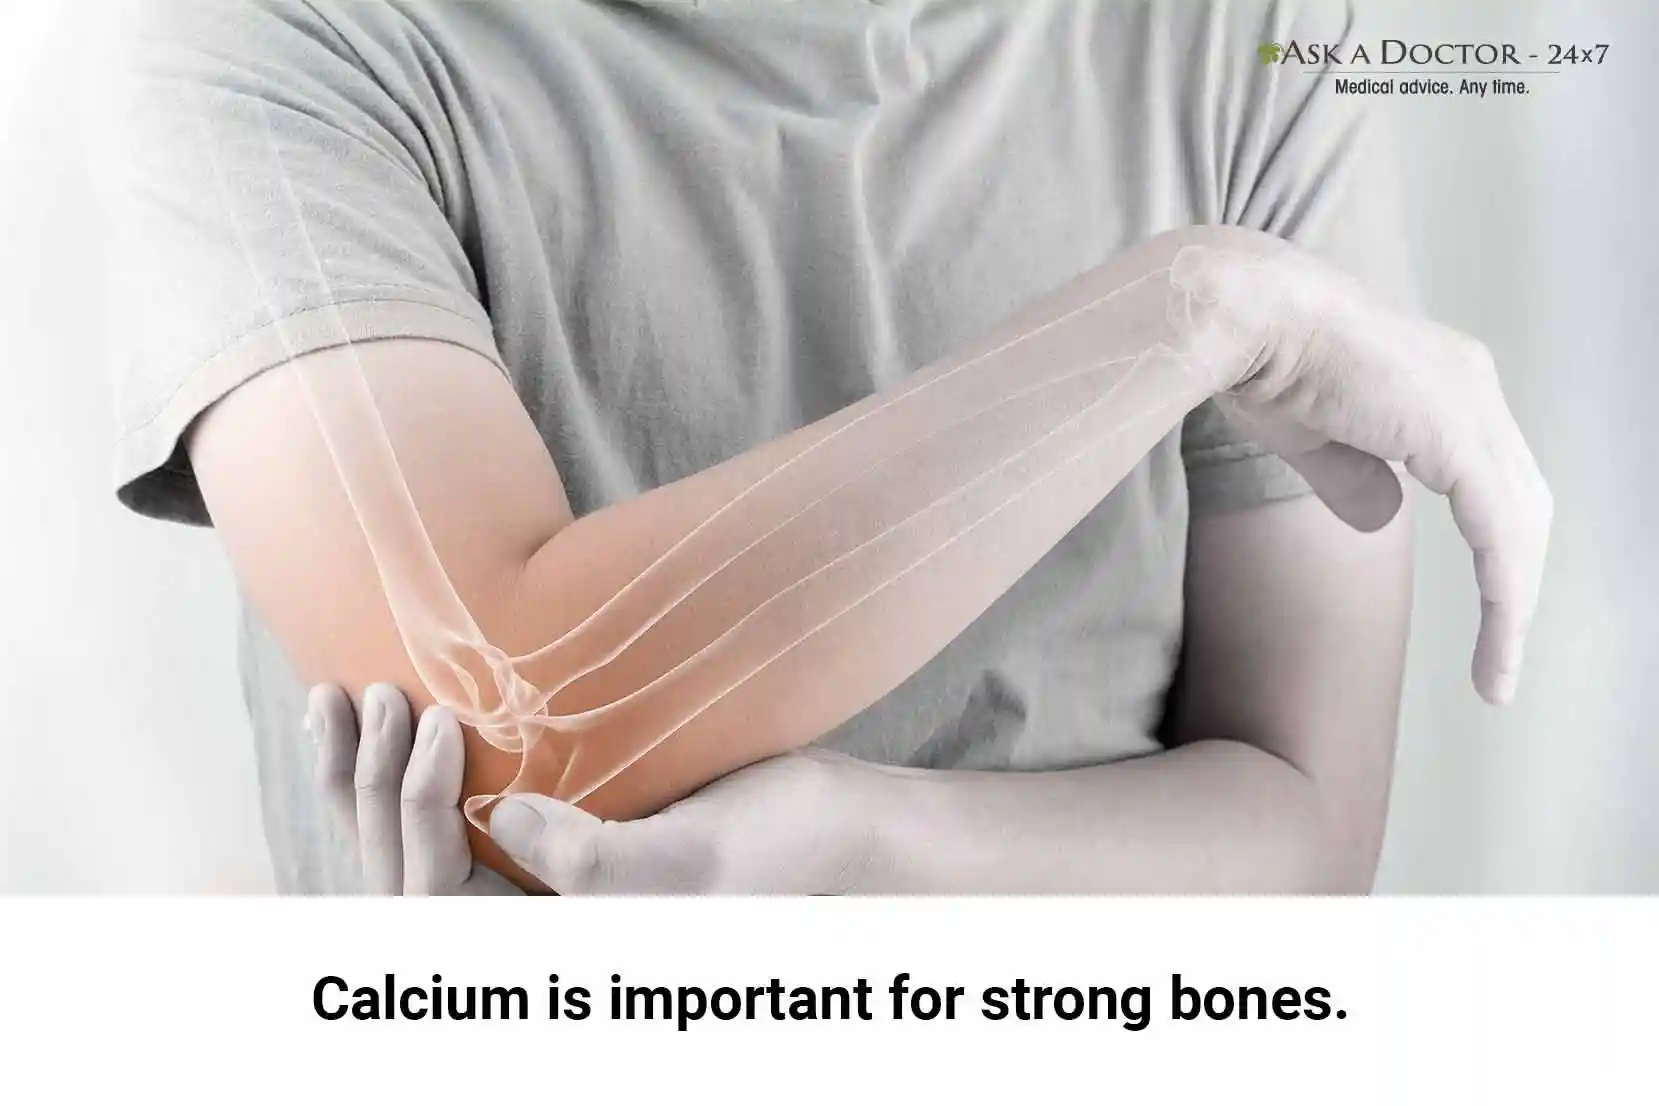 What Are the Signs of a Calcium Deficiency?